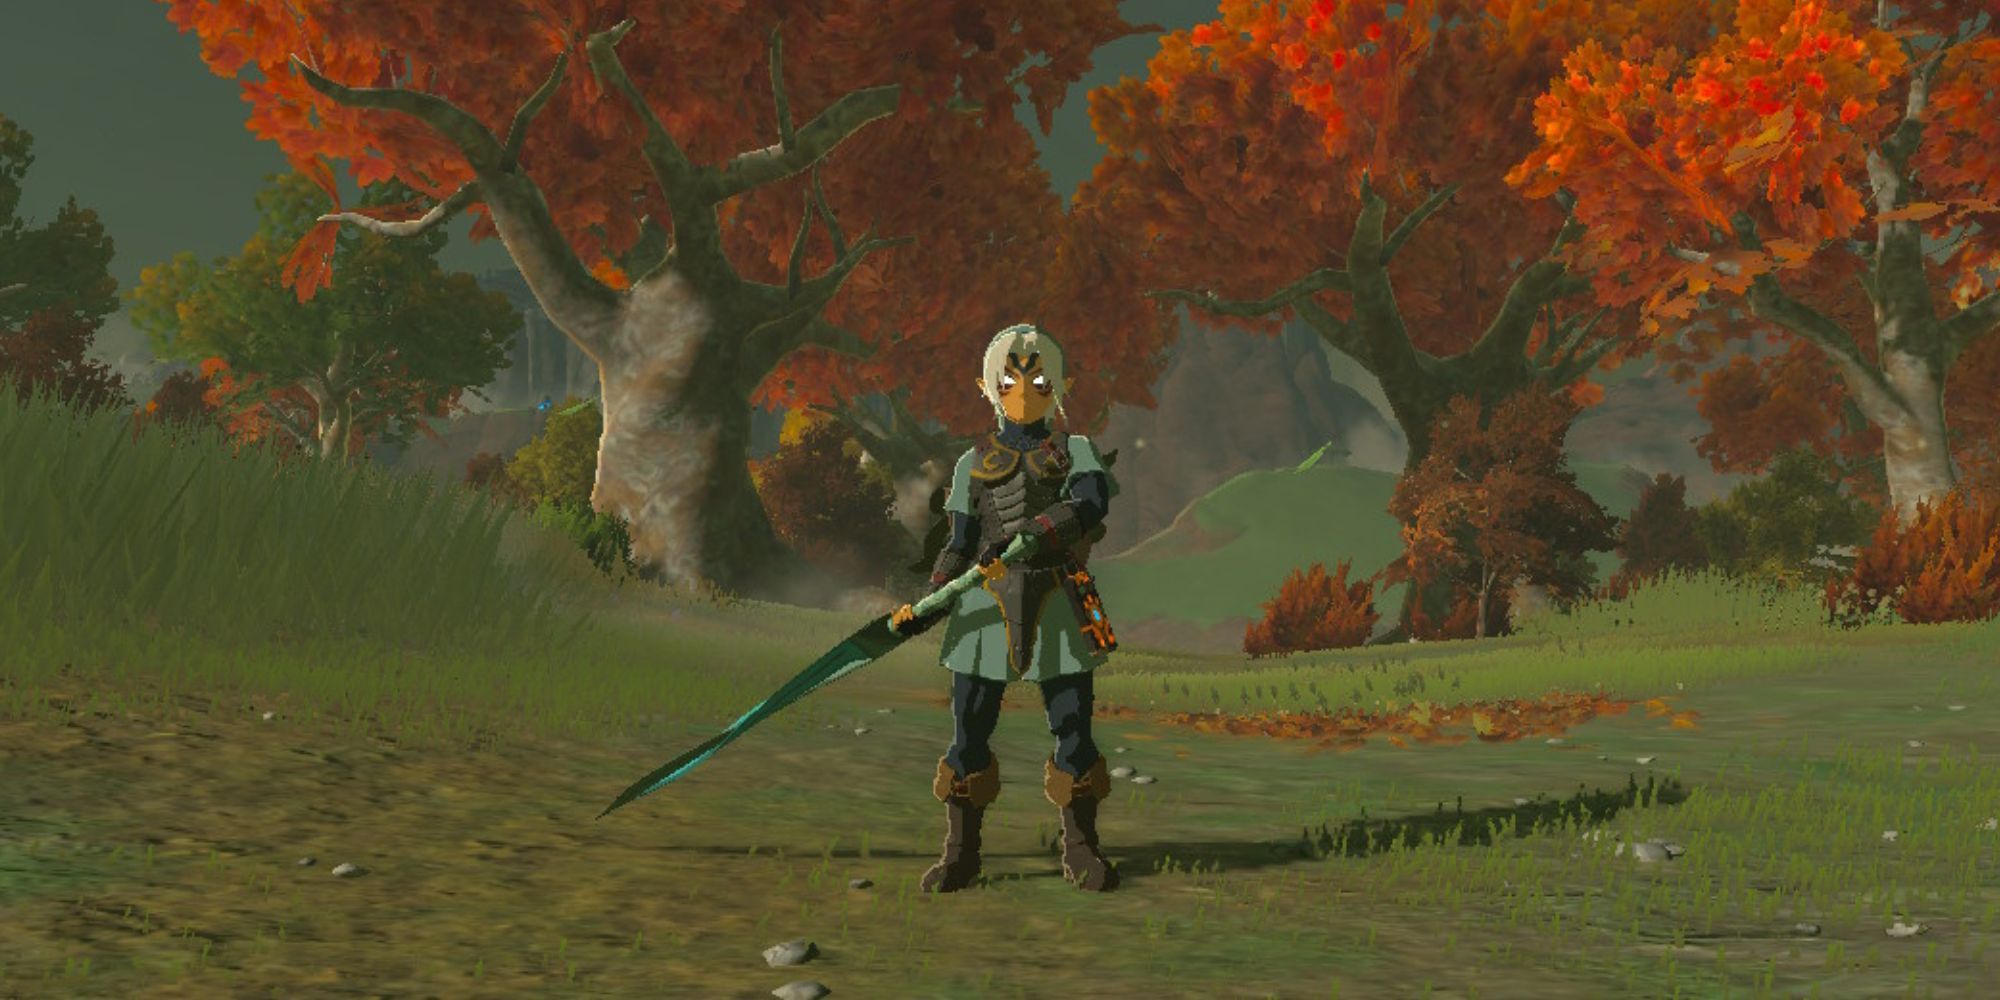 Link holds the Fierce Deity Sword by some trees while wearing the Fierce Deity Set